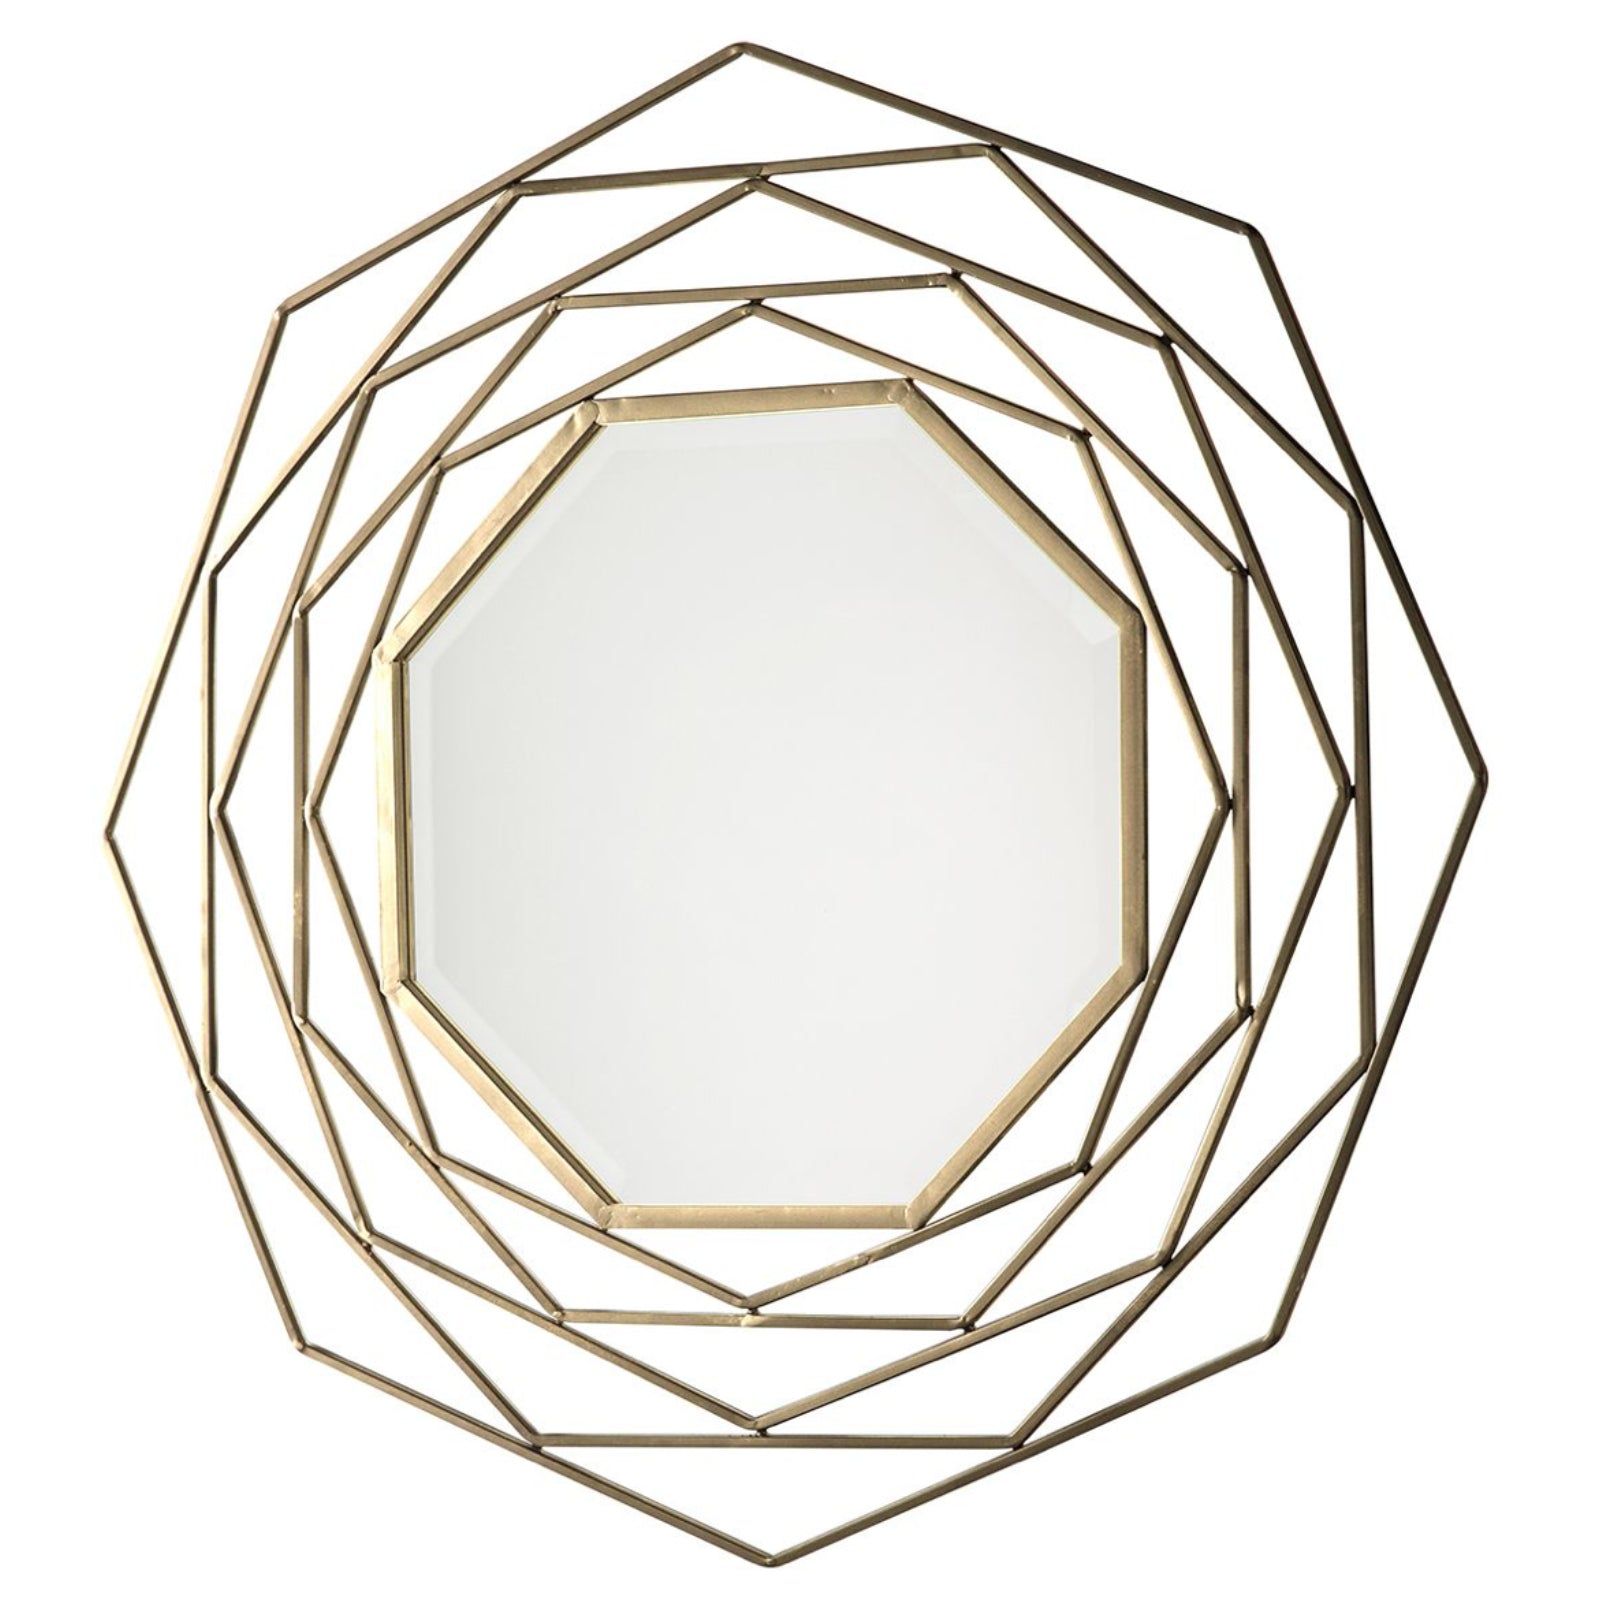 Distressed Gold Art Deco Metal Mirror - The Farthing